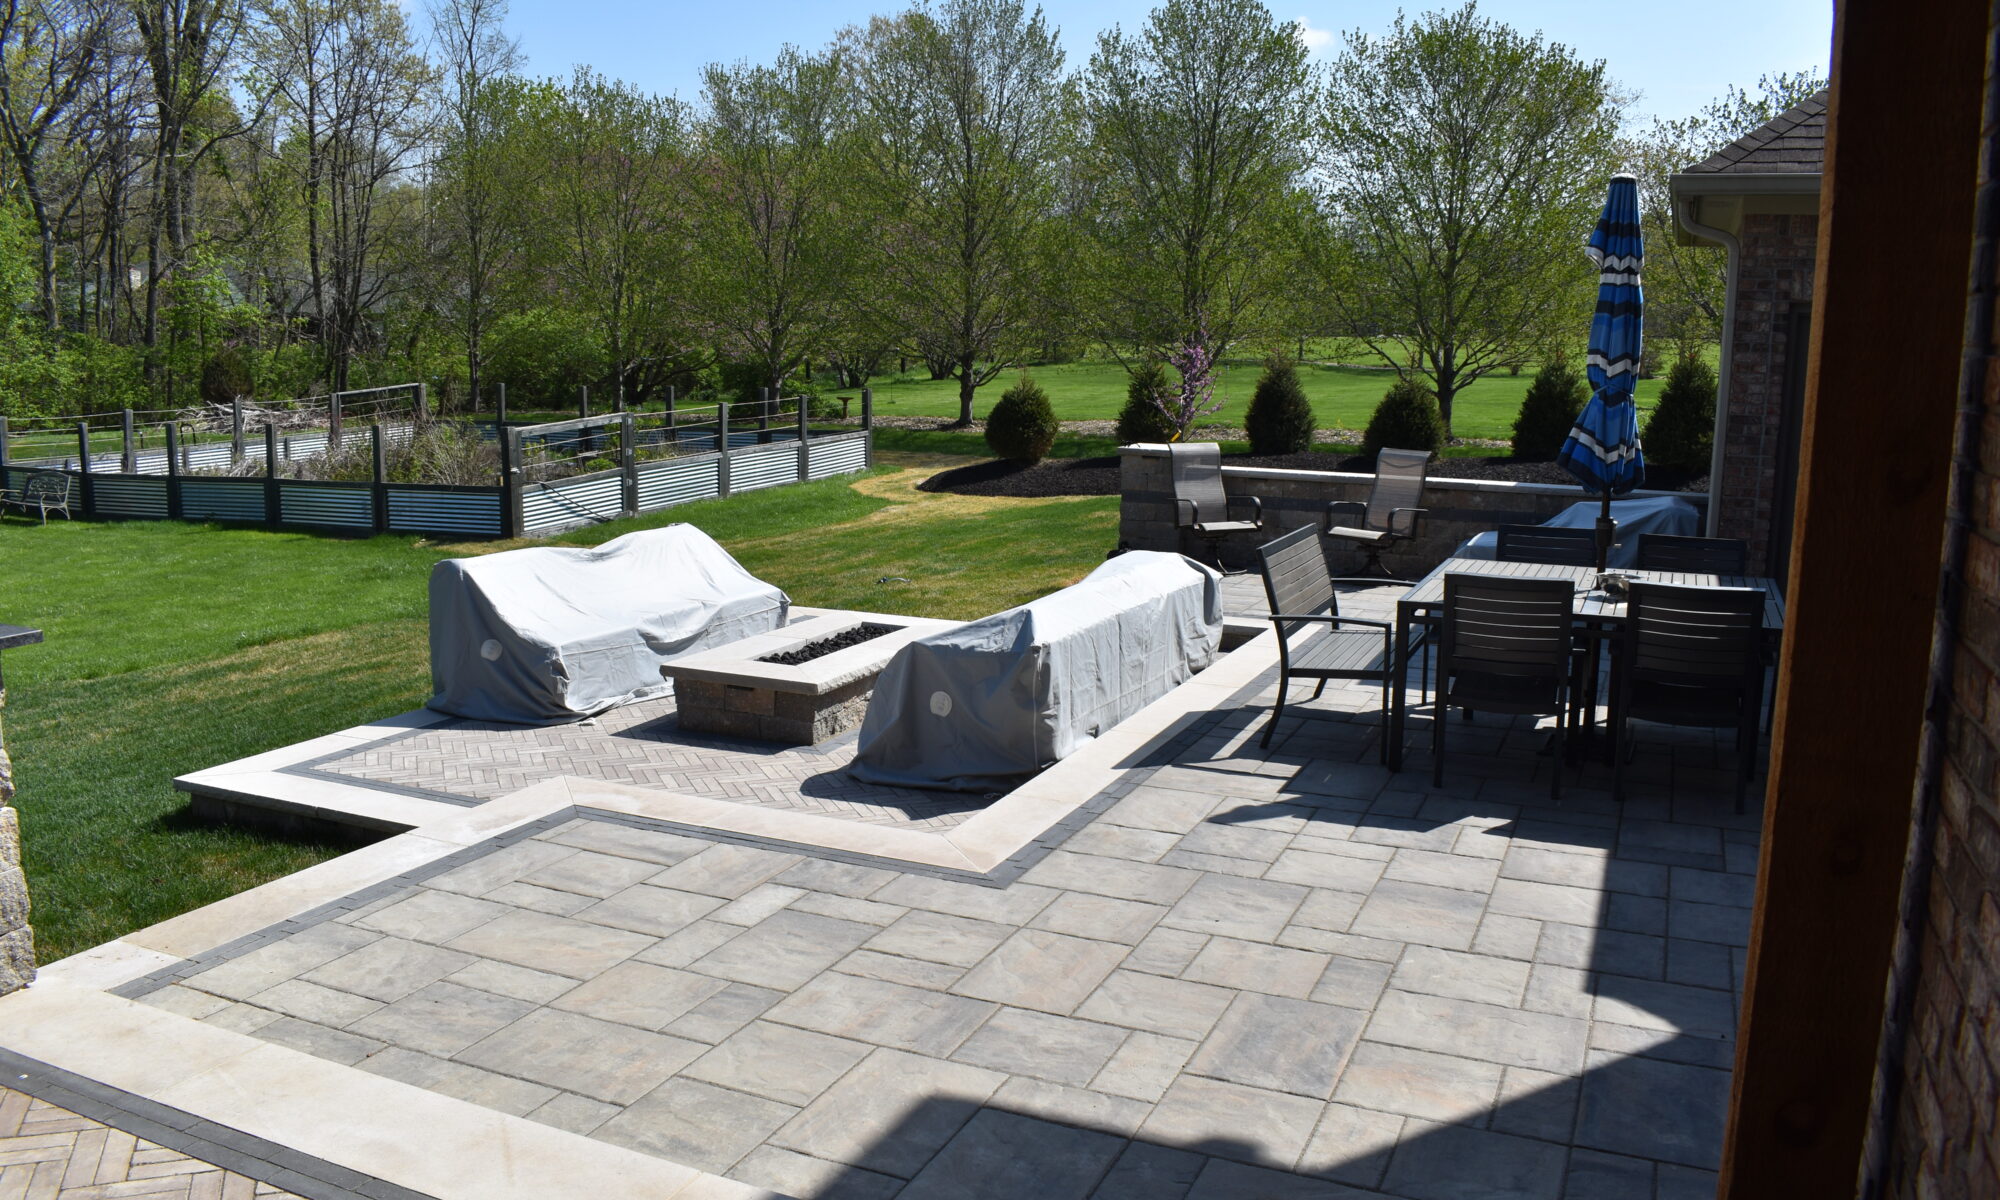 Precision Outdoors Terrace at Fox Run Zionsville Indiana Exterior design and build unilock estate wall river beacon hill flagstone alpine grey fossil unilock mattoni dark charcoal sable brown pergola outdoor kitchen gas fire pit outdoor dining area grill space several entertaining spaces large paver patio multilevel patio custom landscaping sod backyard goals mulch tree plants outdoor lighting